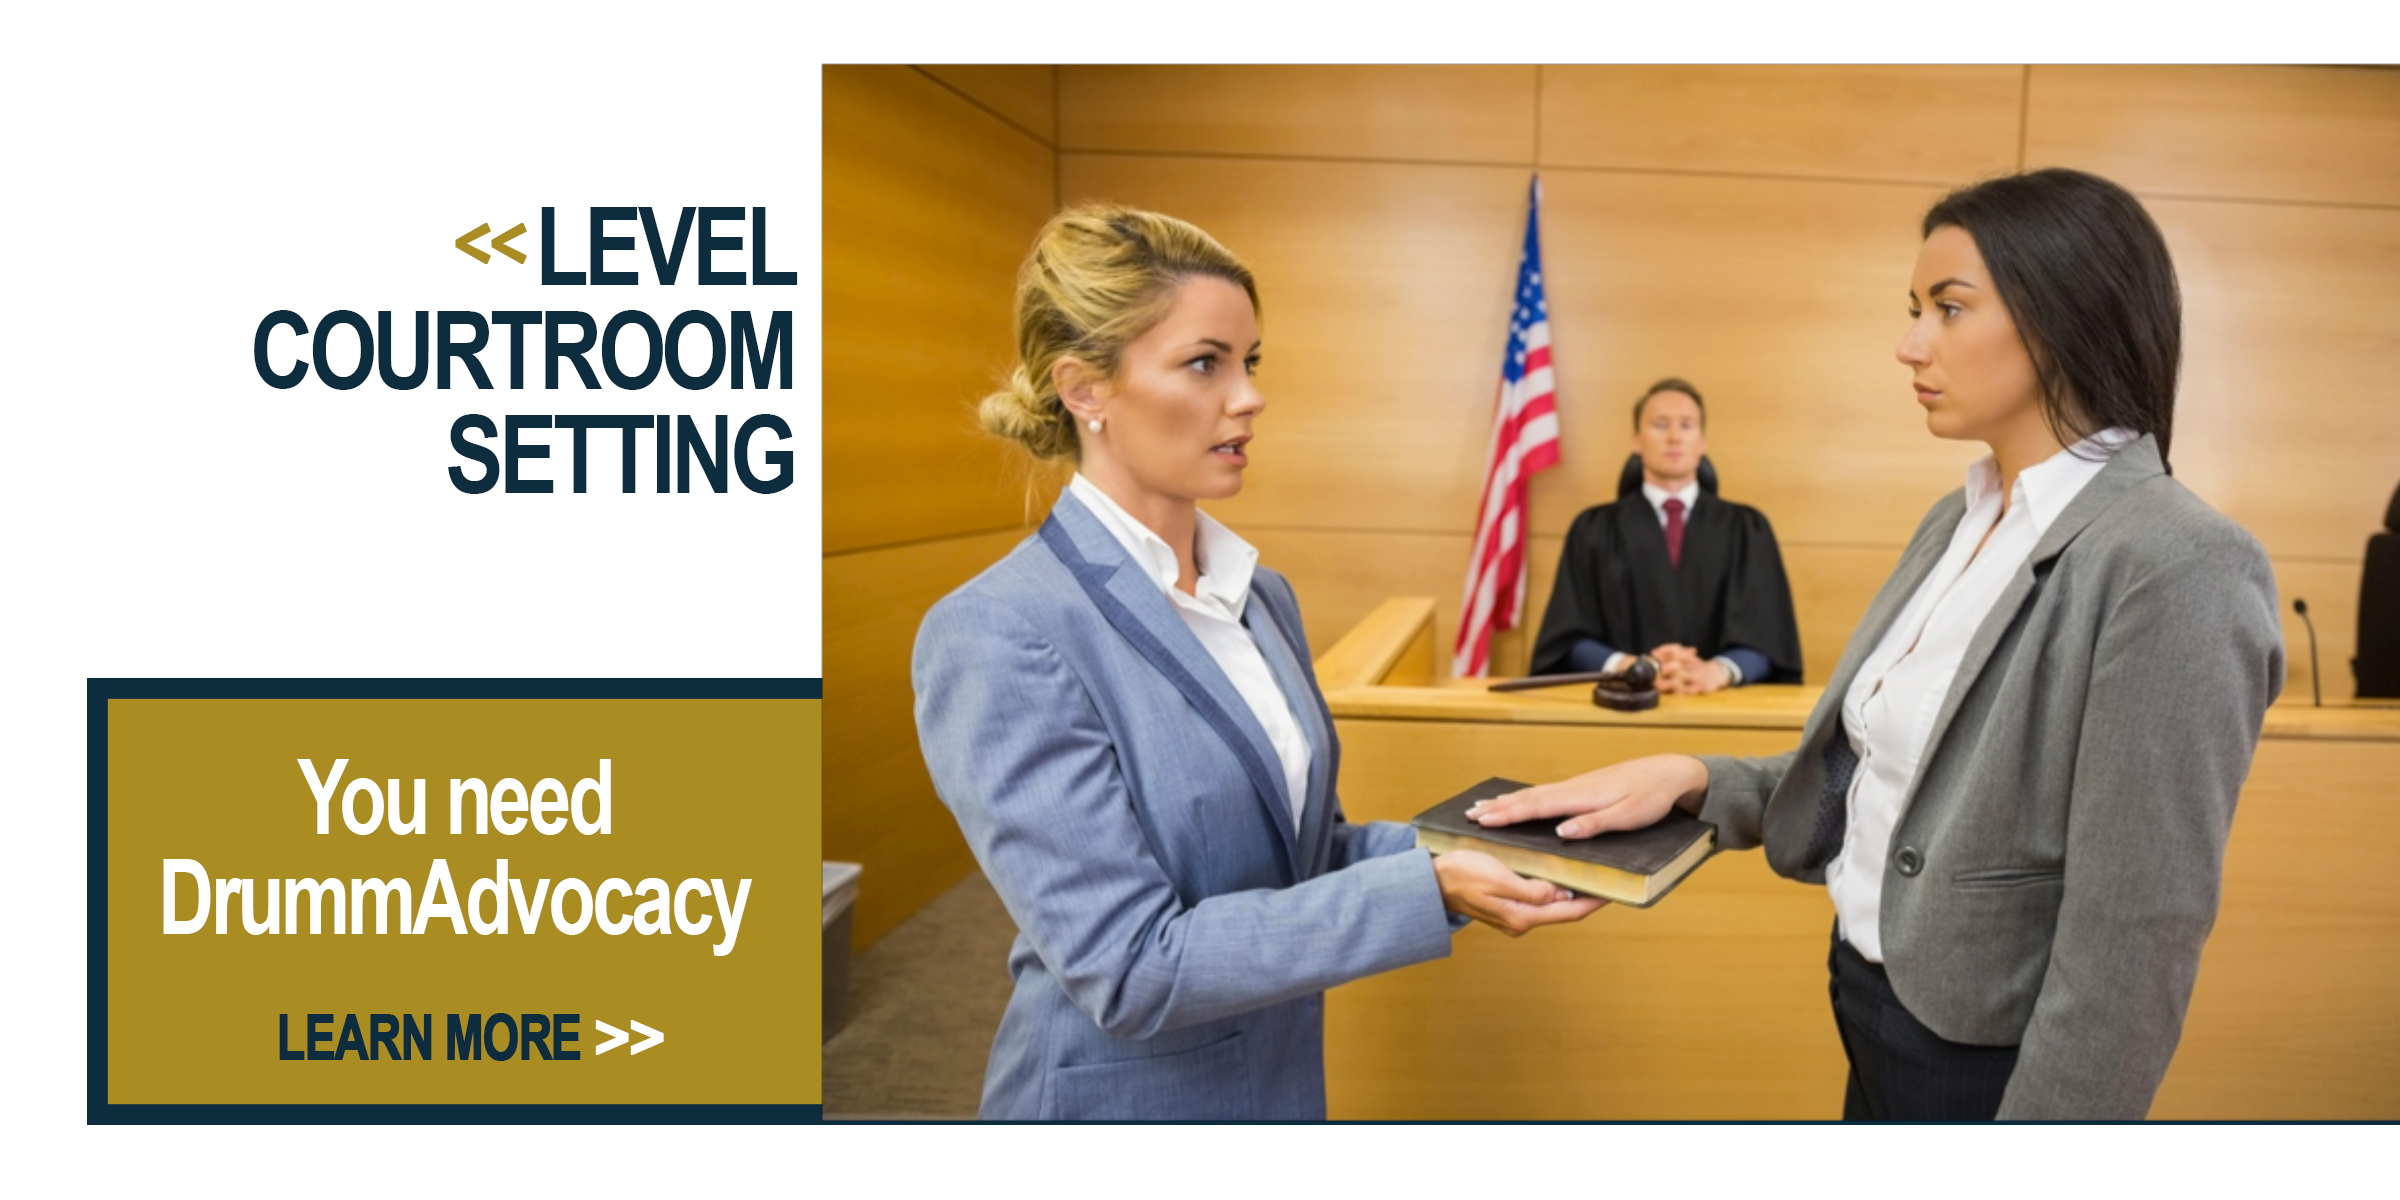 Level courtroom setting. You need Drumm Advocacy. Learn more.